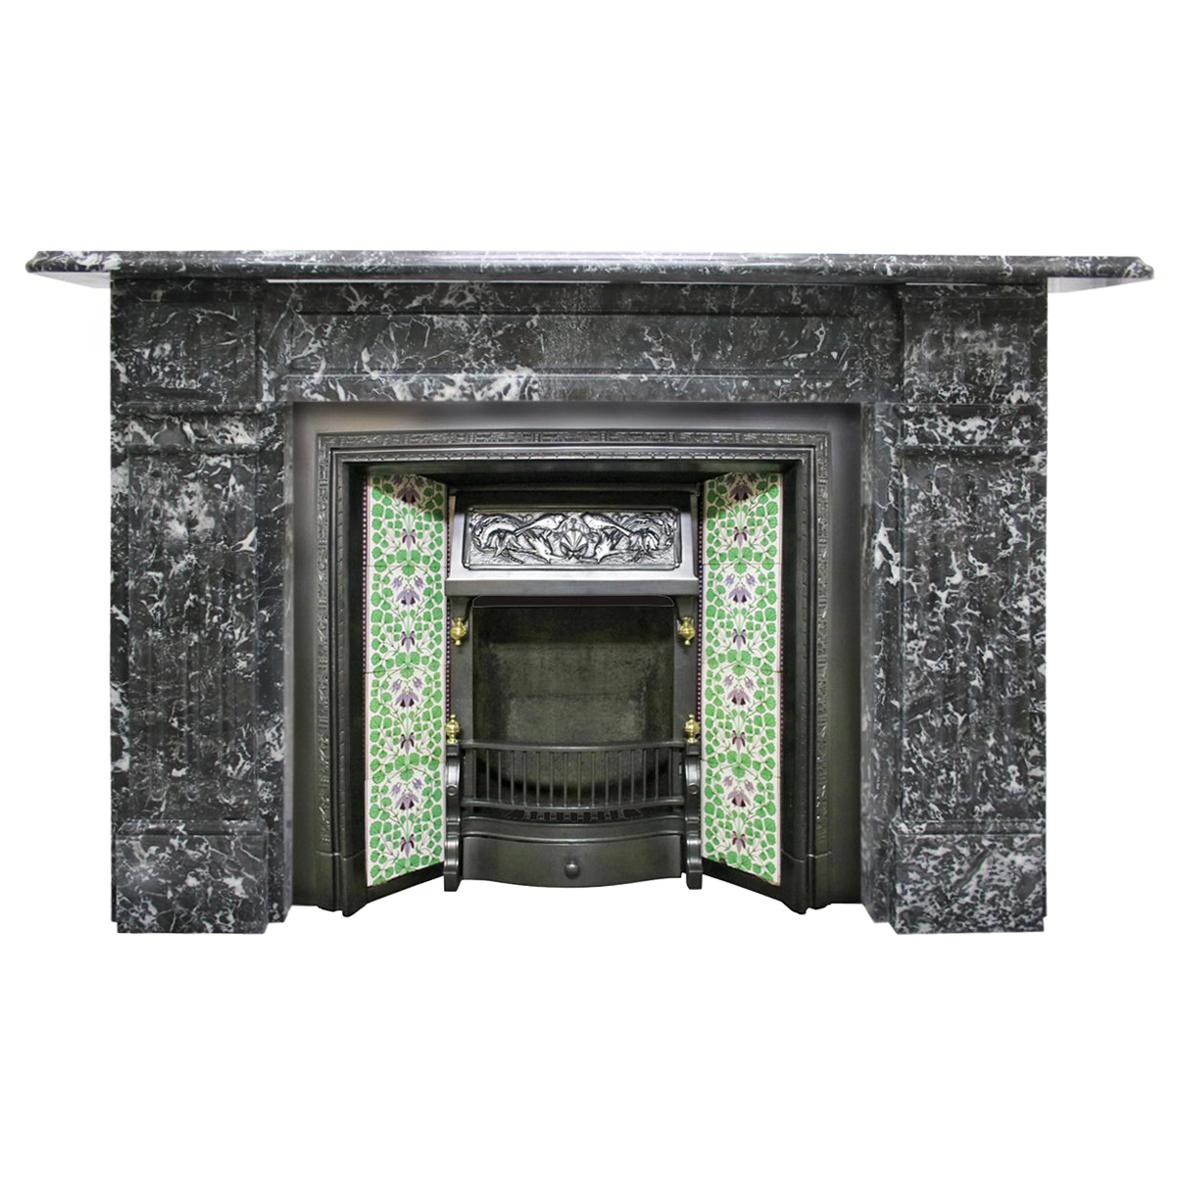 Fully restored antique late Victorian St Anne marble fire surround